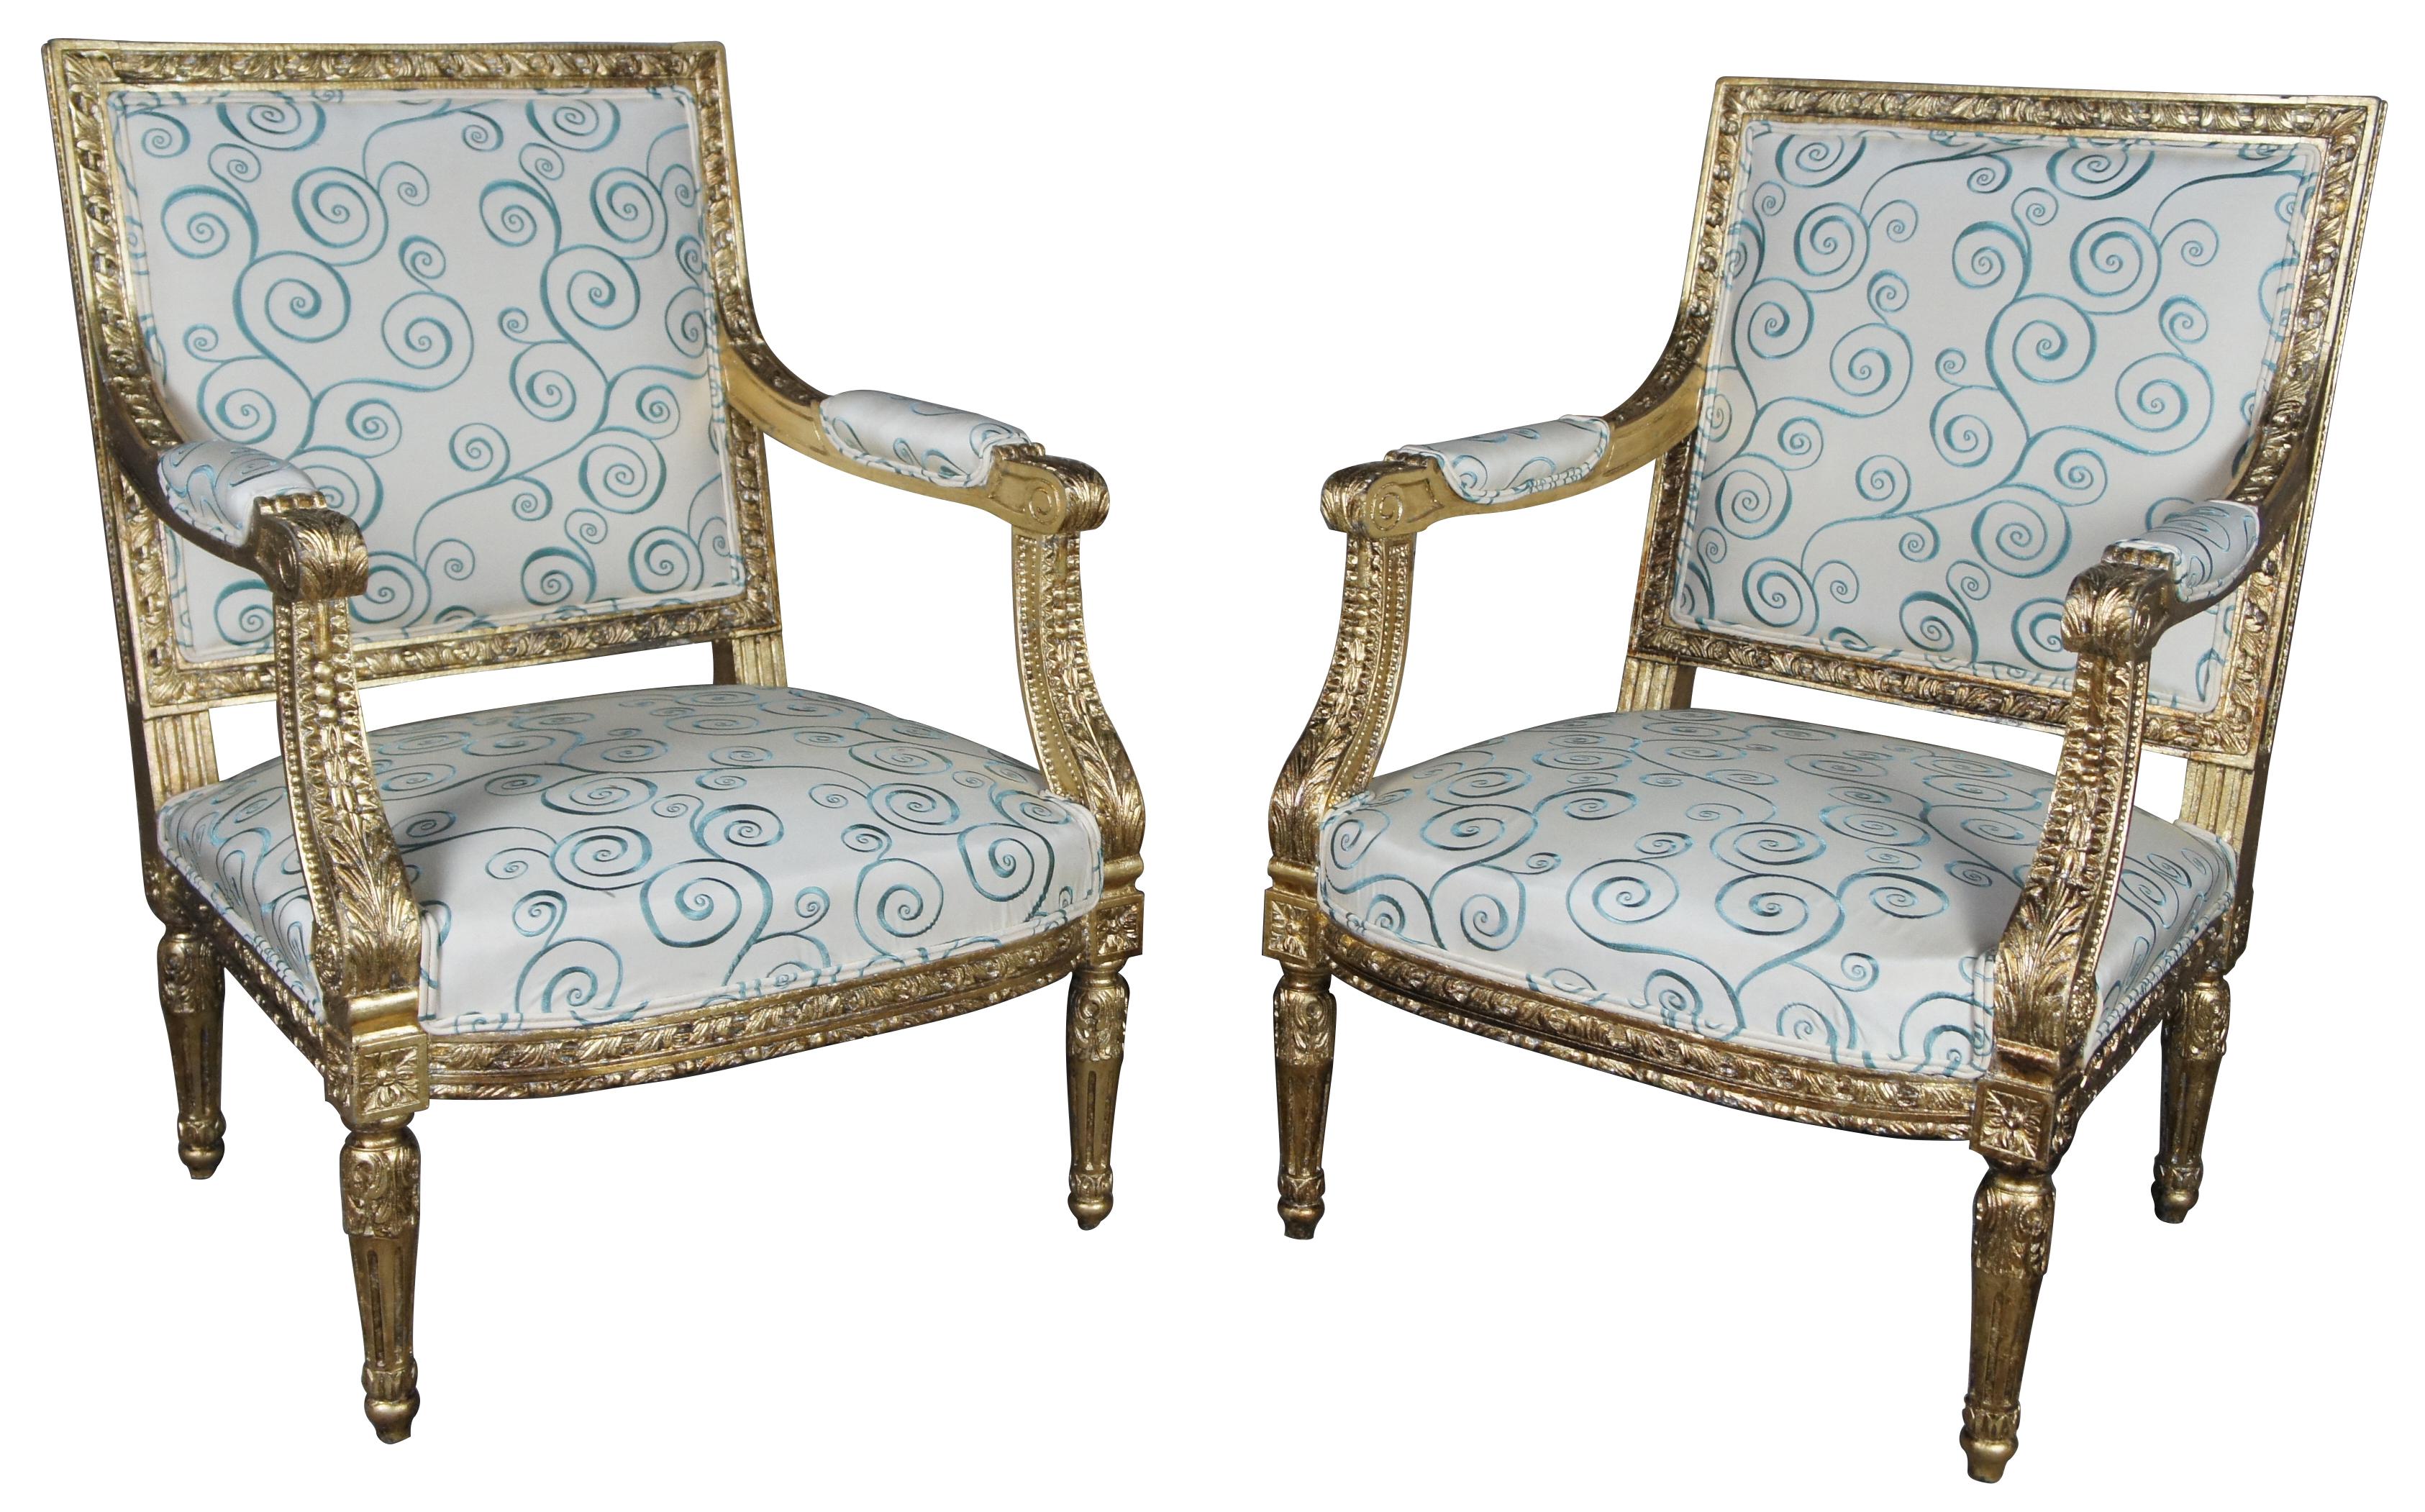 Antique 19th century Louis XVI Fauteuil armchairs neoclassical French accent

Late 19th century Louis XVI fauteuils. An ornate pair with modern upholstery, trimmed in gold with acanthus detail and traditional accents. A great pair of armchairs for